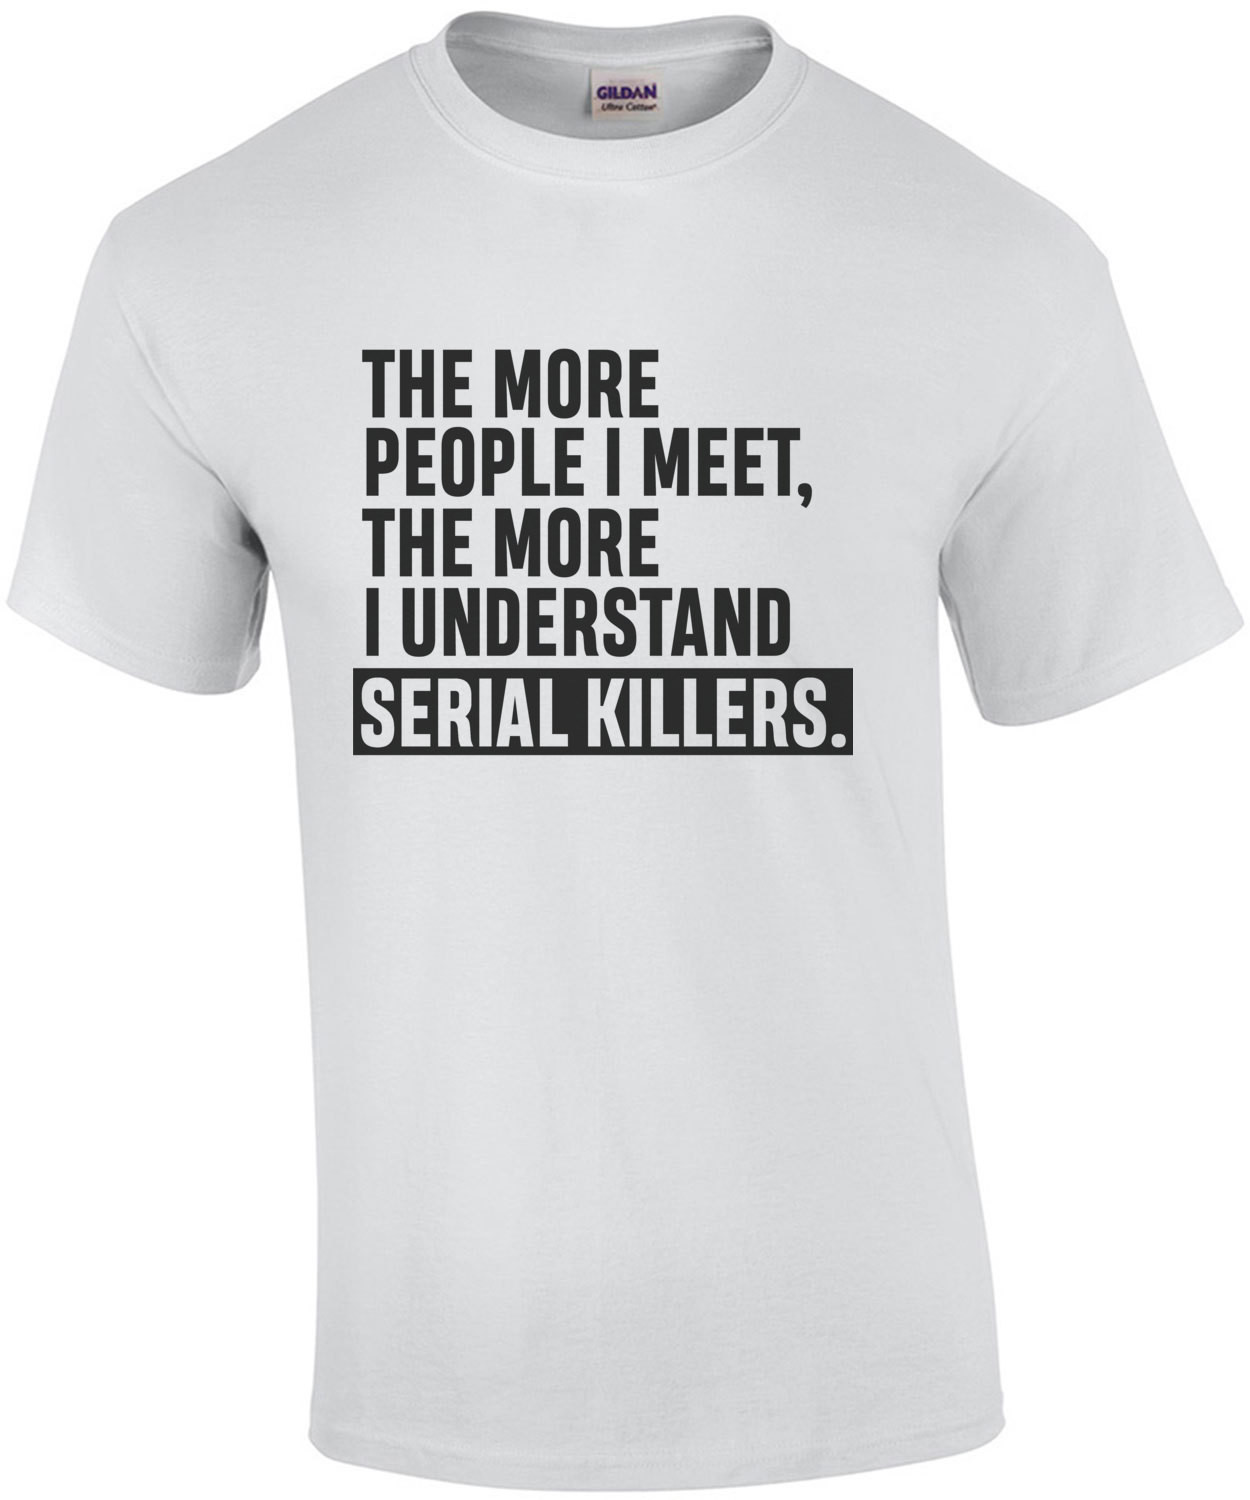 The more people I meet, the more I understand serial killers - sarcastic t-shirt